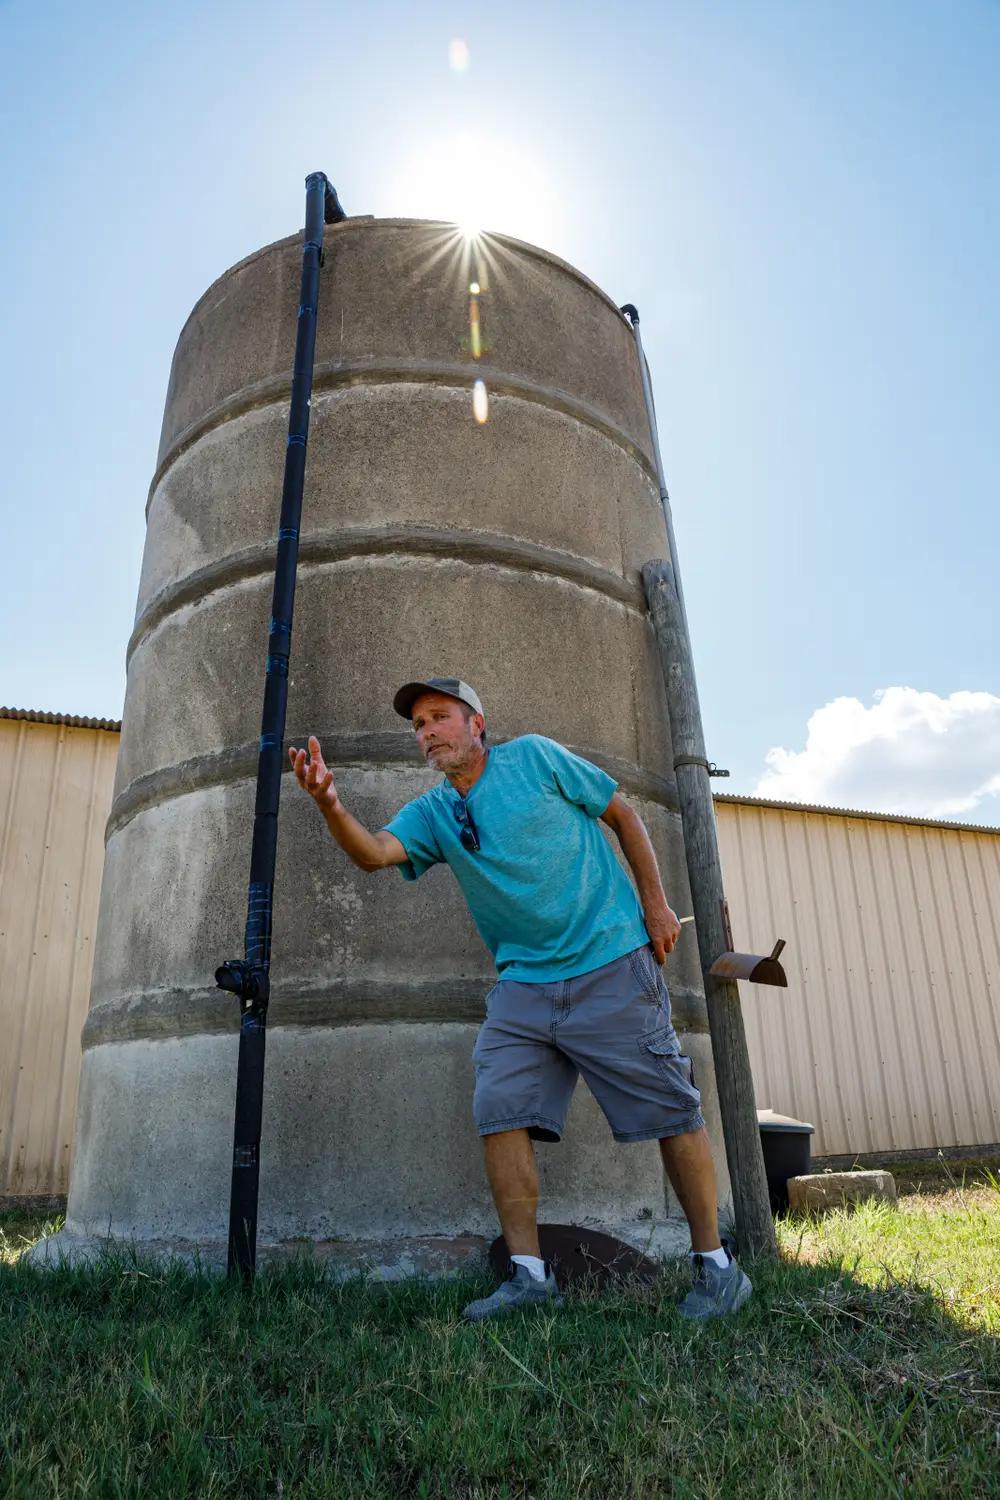 A man in shorts, a blue tee shirt, and a baseball cap stands in front of a silo.